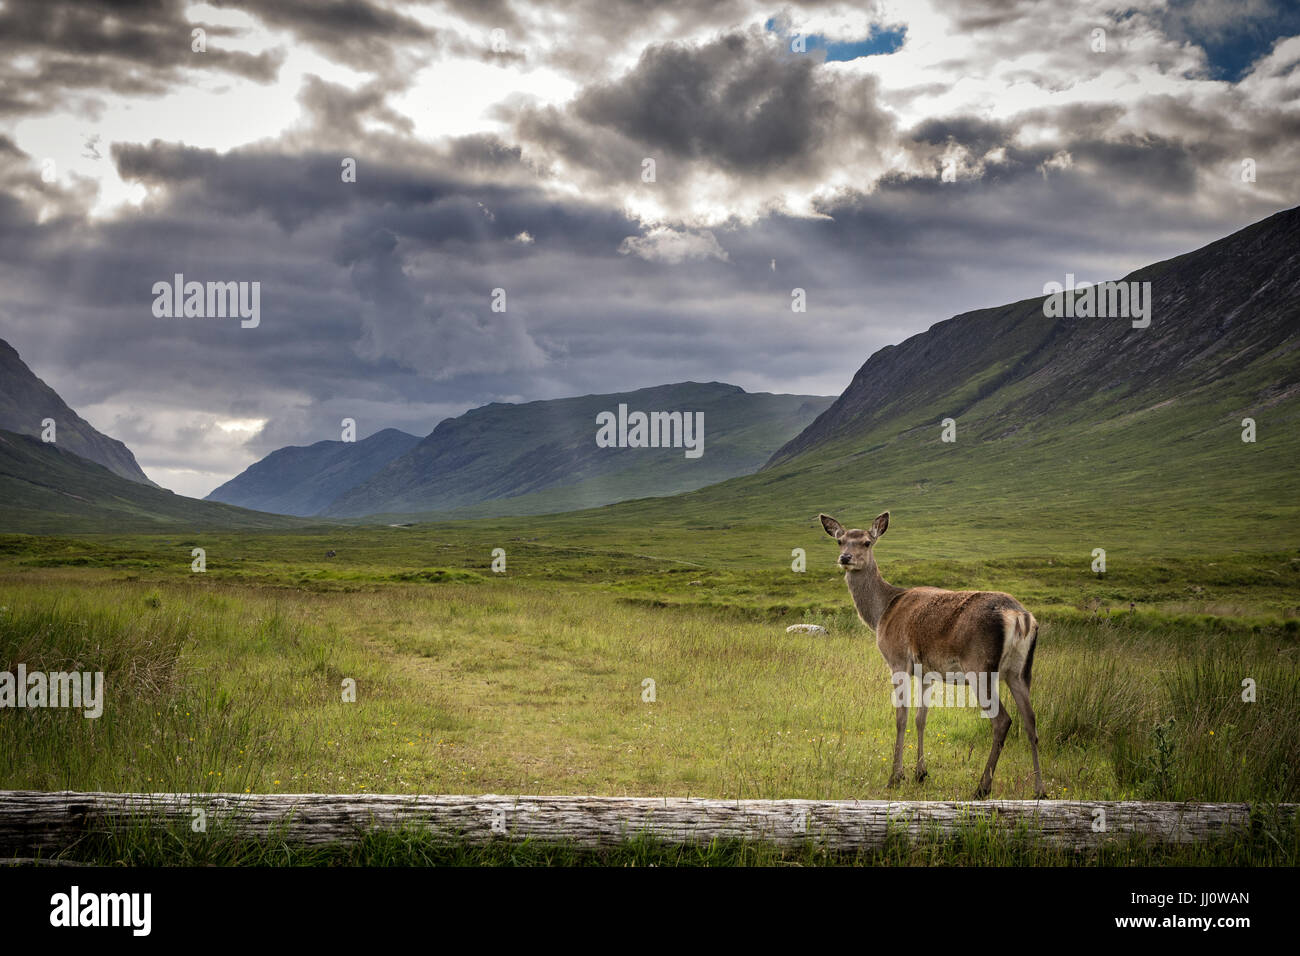 A female deer standing in the foreground of Glencoe mountains in Scotland Stock Photo